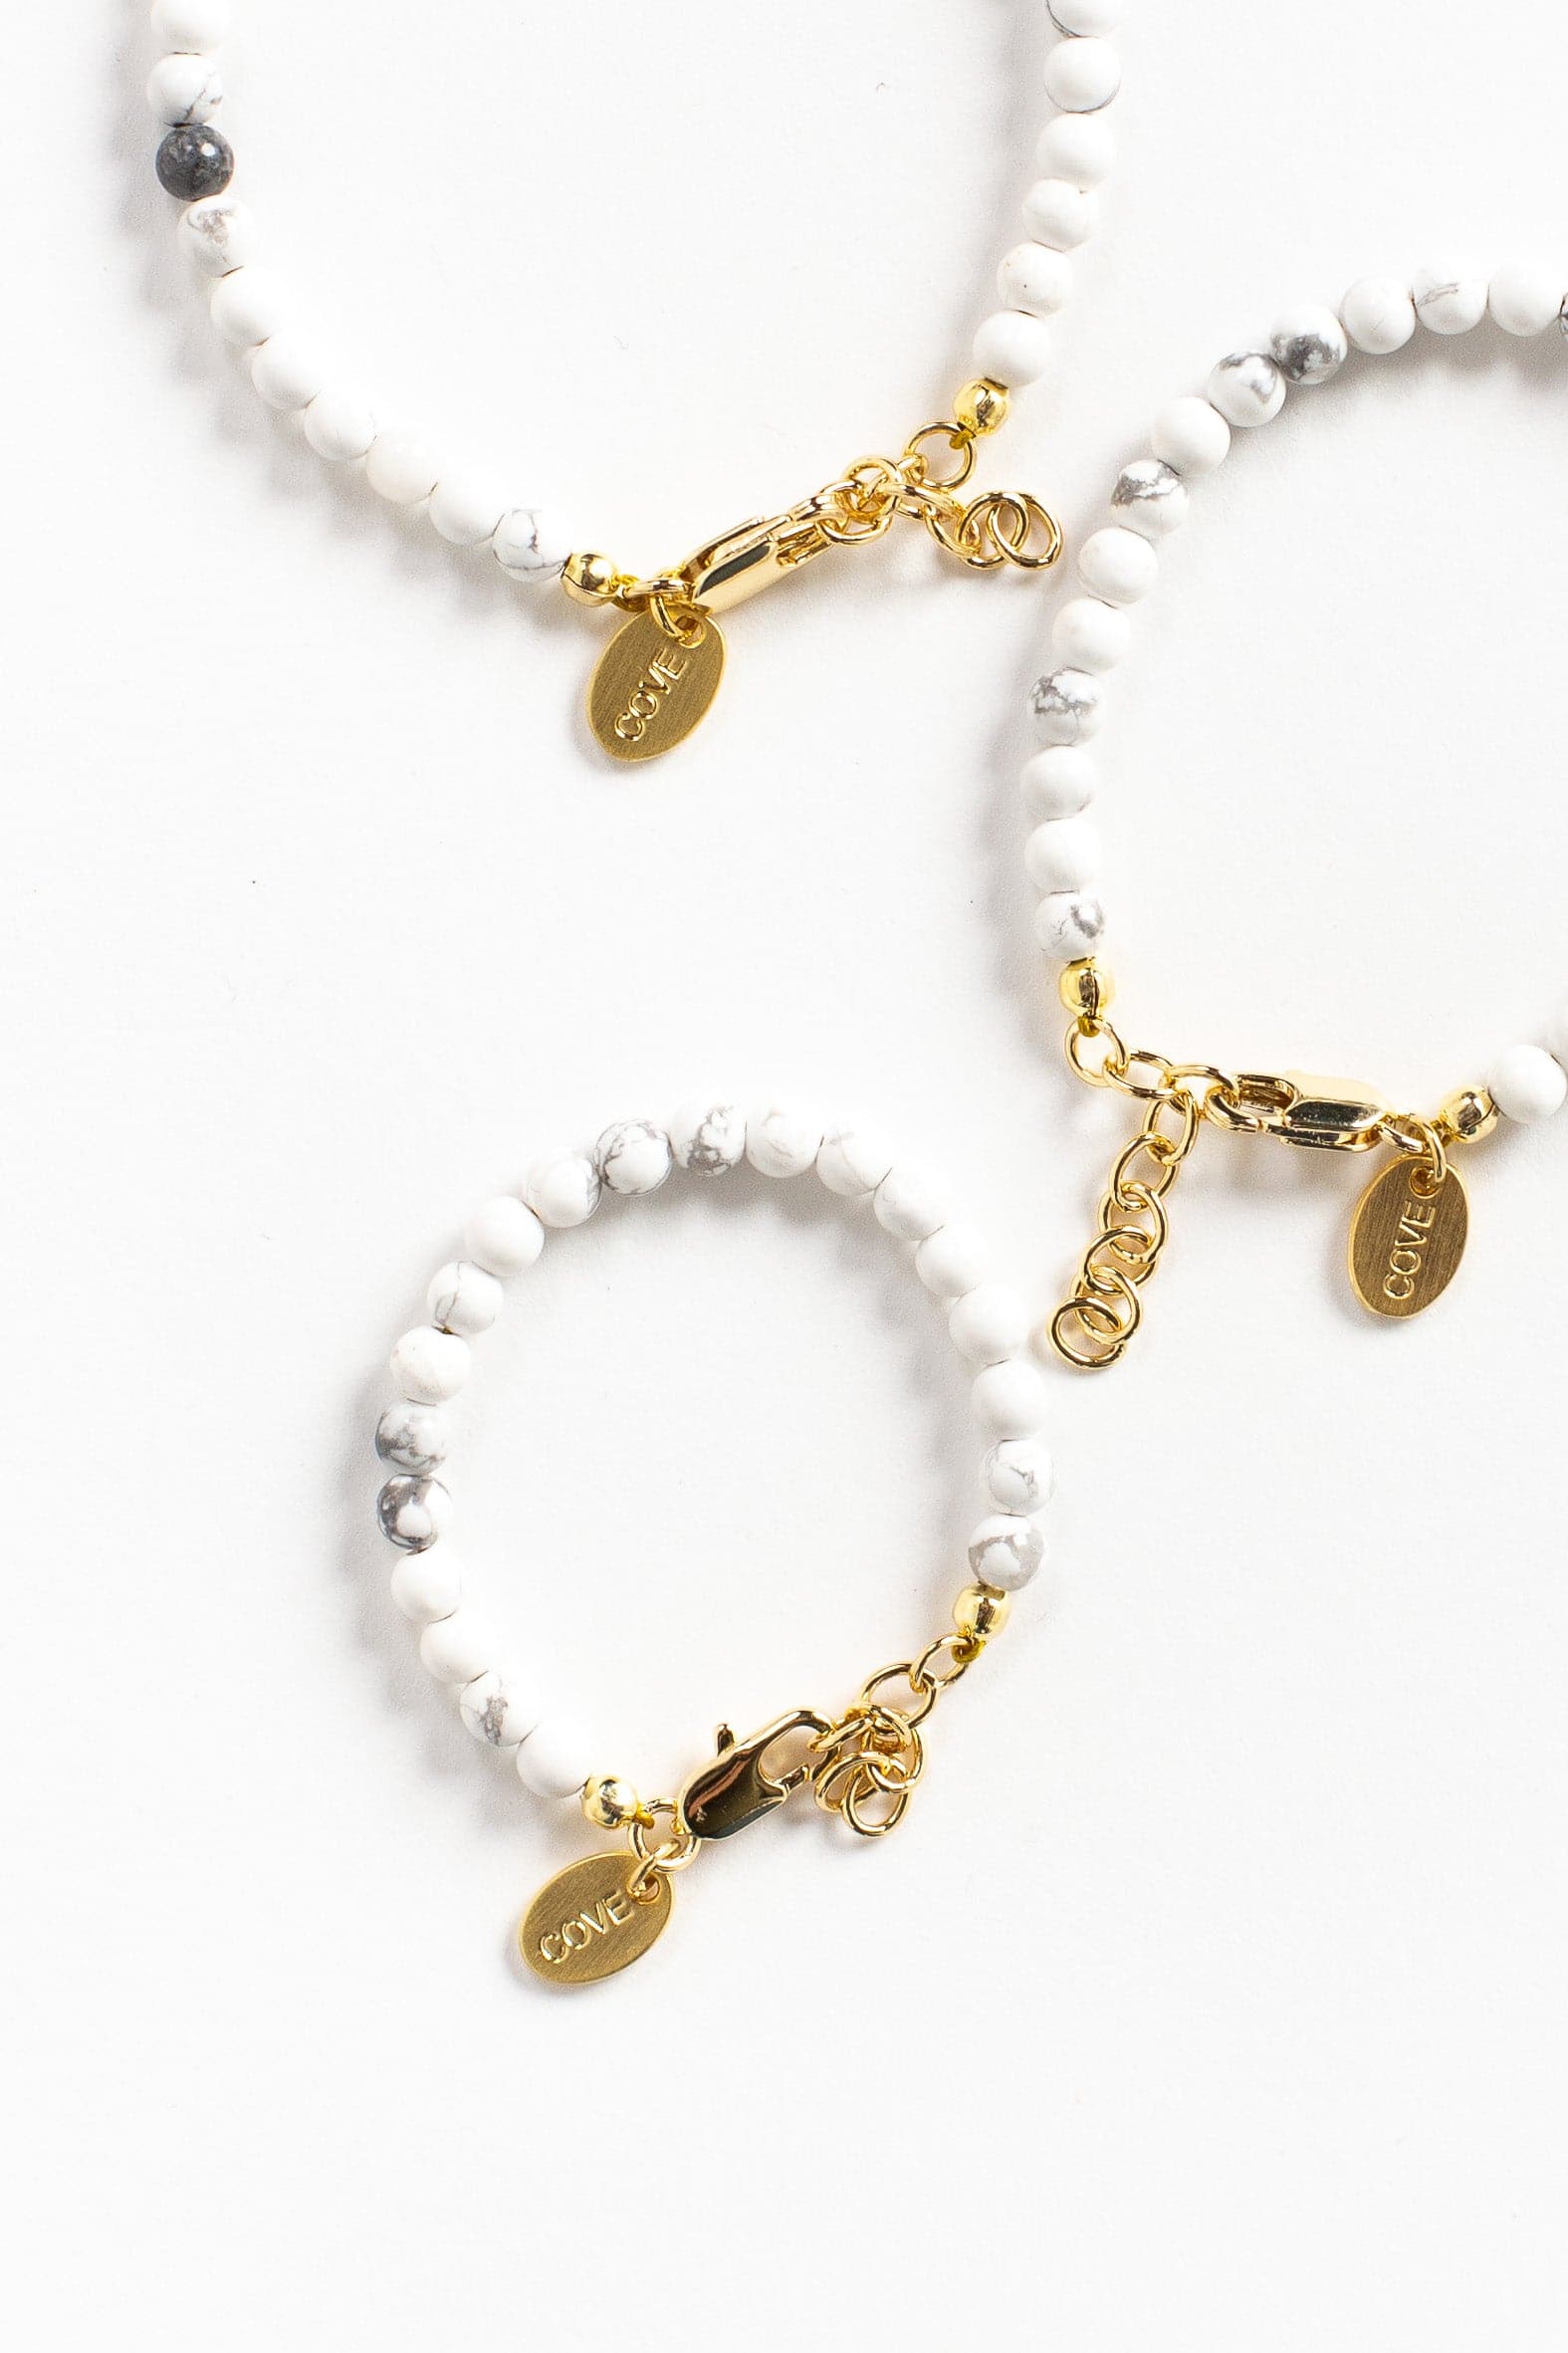 Bracelets with semi-precious stones and gold details – MiMoana